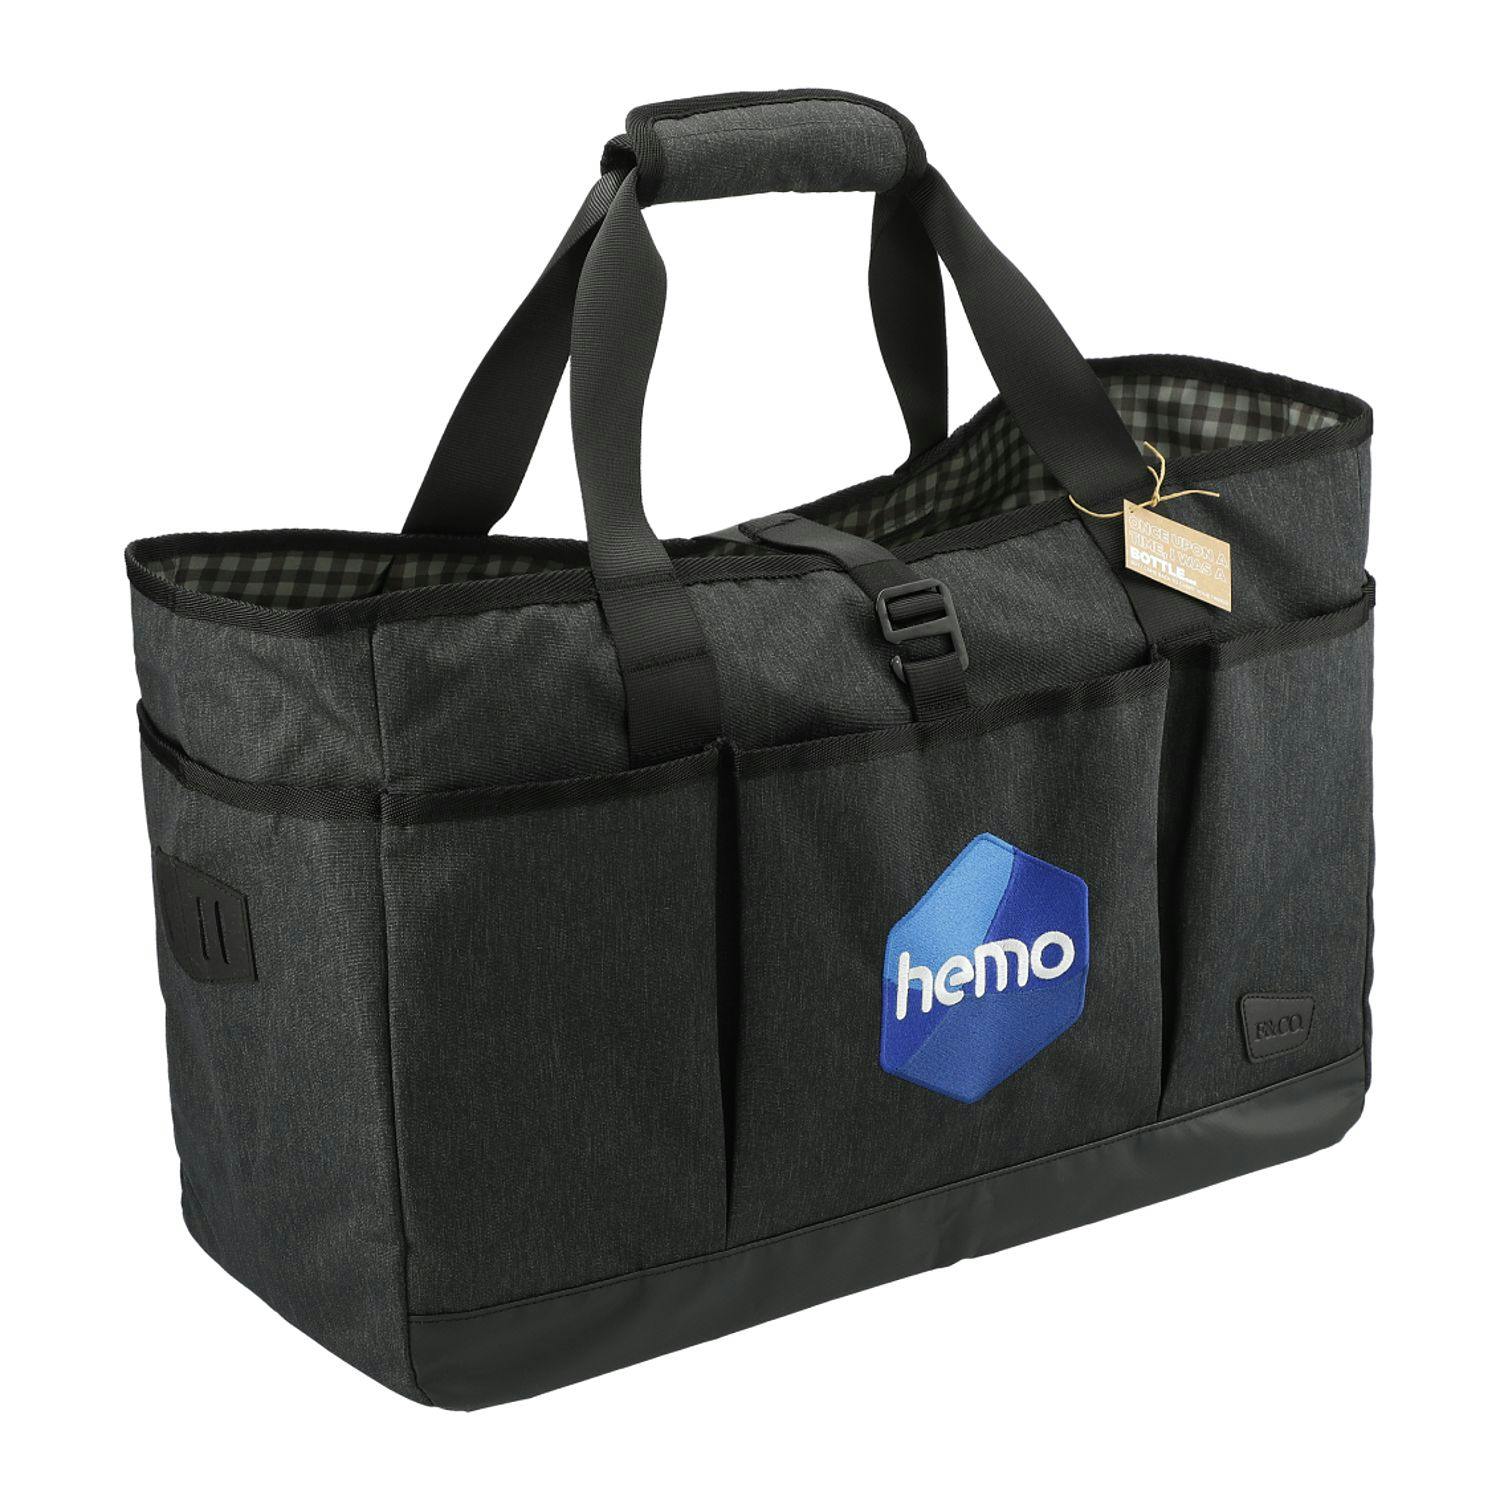 Field & Co. Fireside Eco Utility Tote - additional Image 1